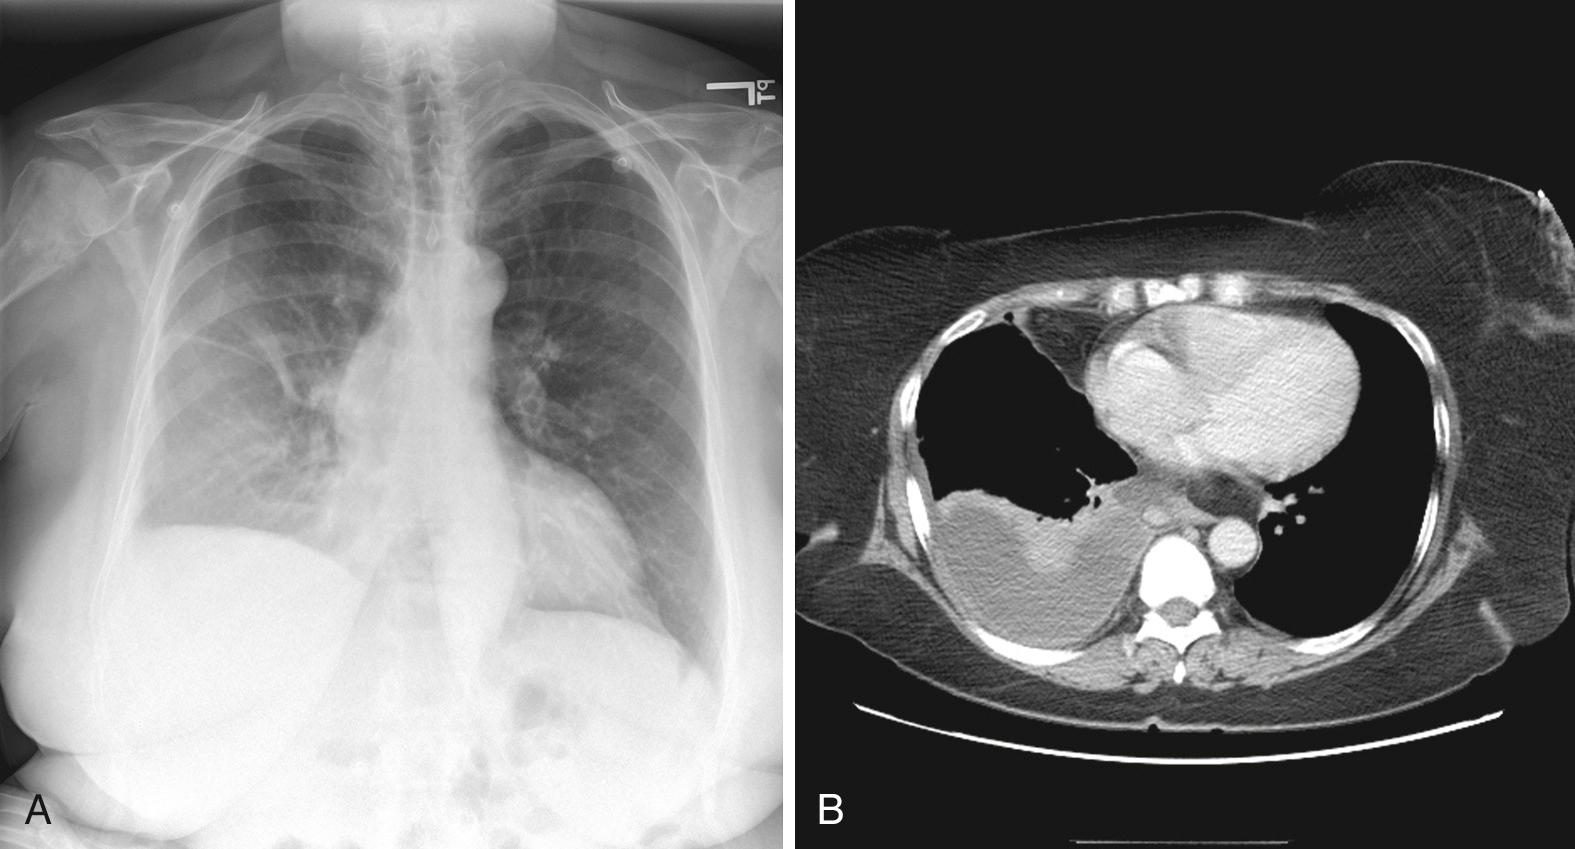 Figure 9.5, A, Supine radiograph of a patient with a large pleural effusion. Note the generalized homogeneous (“ground glass”) increase in radiopacity of the right side of this patient because of posterior layering of a pleural effusion. Also note the difference in the appearance of the pleural effusion when the patient is supine. As opposed to the upright radiograph (see Fig. 9.3 ), there is minimal blunting of the costophrenic angles and the vascular opacities are preserved in the overlying lung. B, A chest computed tomography (CT) scan of the same patient confirms the presence of a right-sided pleural effusion. Note the typical sickle-shaped appearance of the effusion on CT.